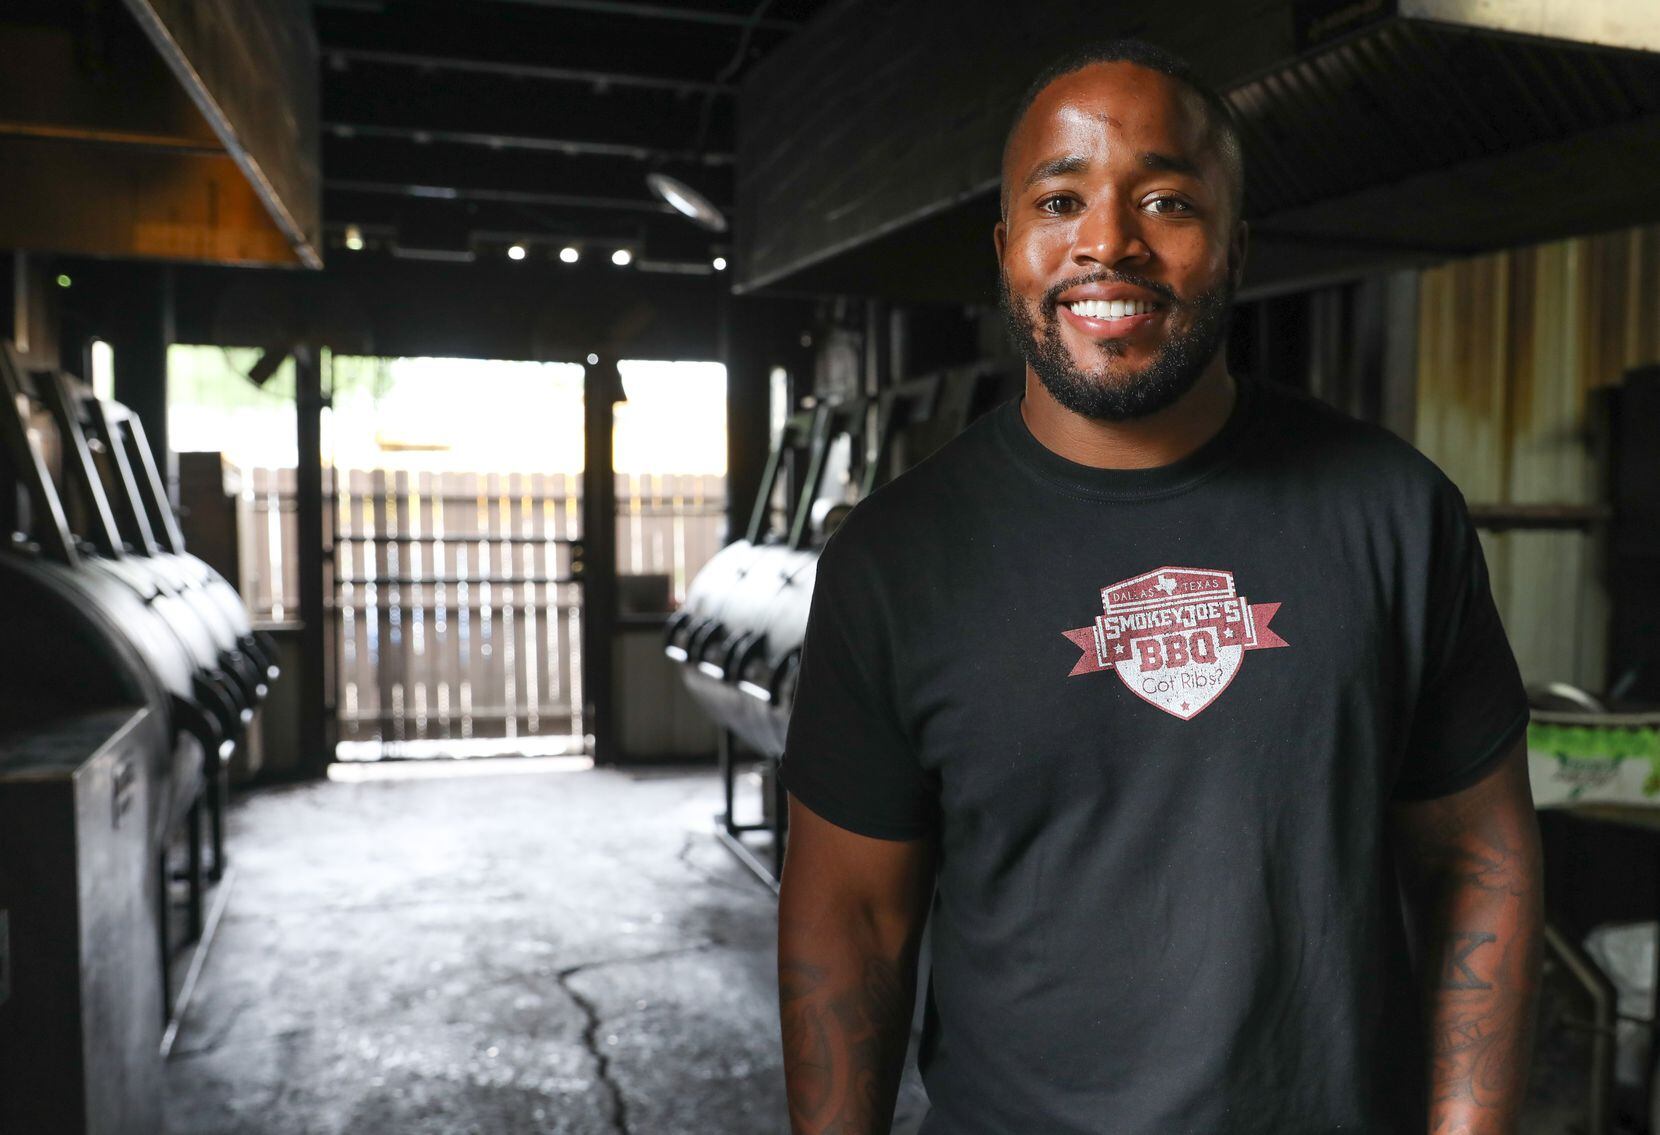 Owner Kris Manning stands by the Smokey Joe's BBQ pits in Dallas.